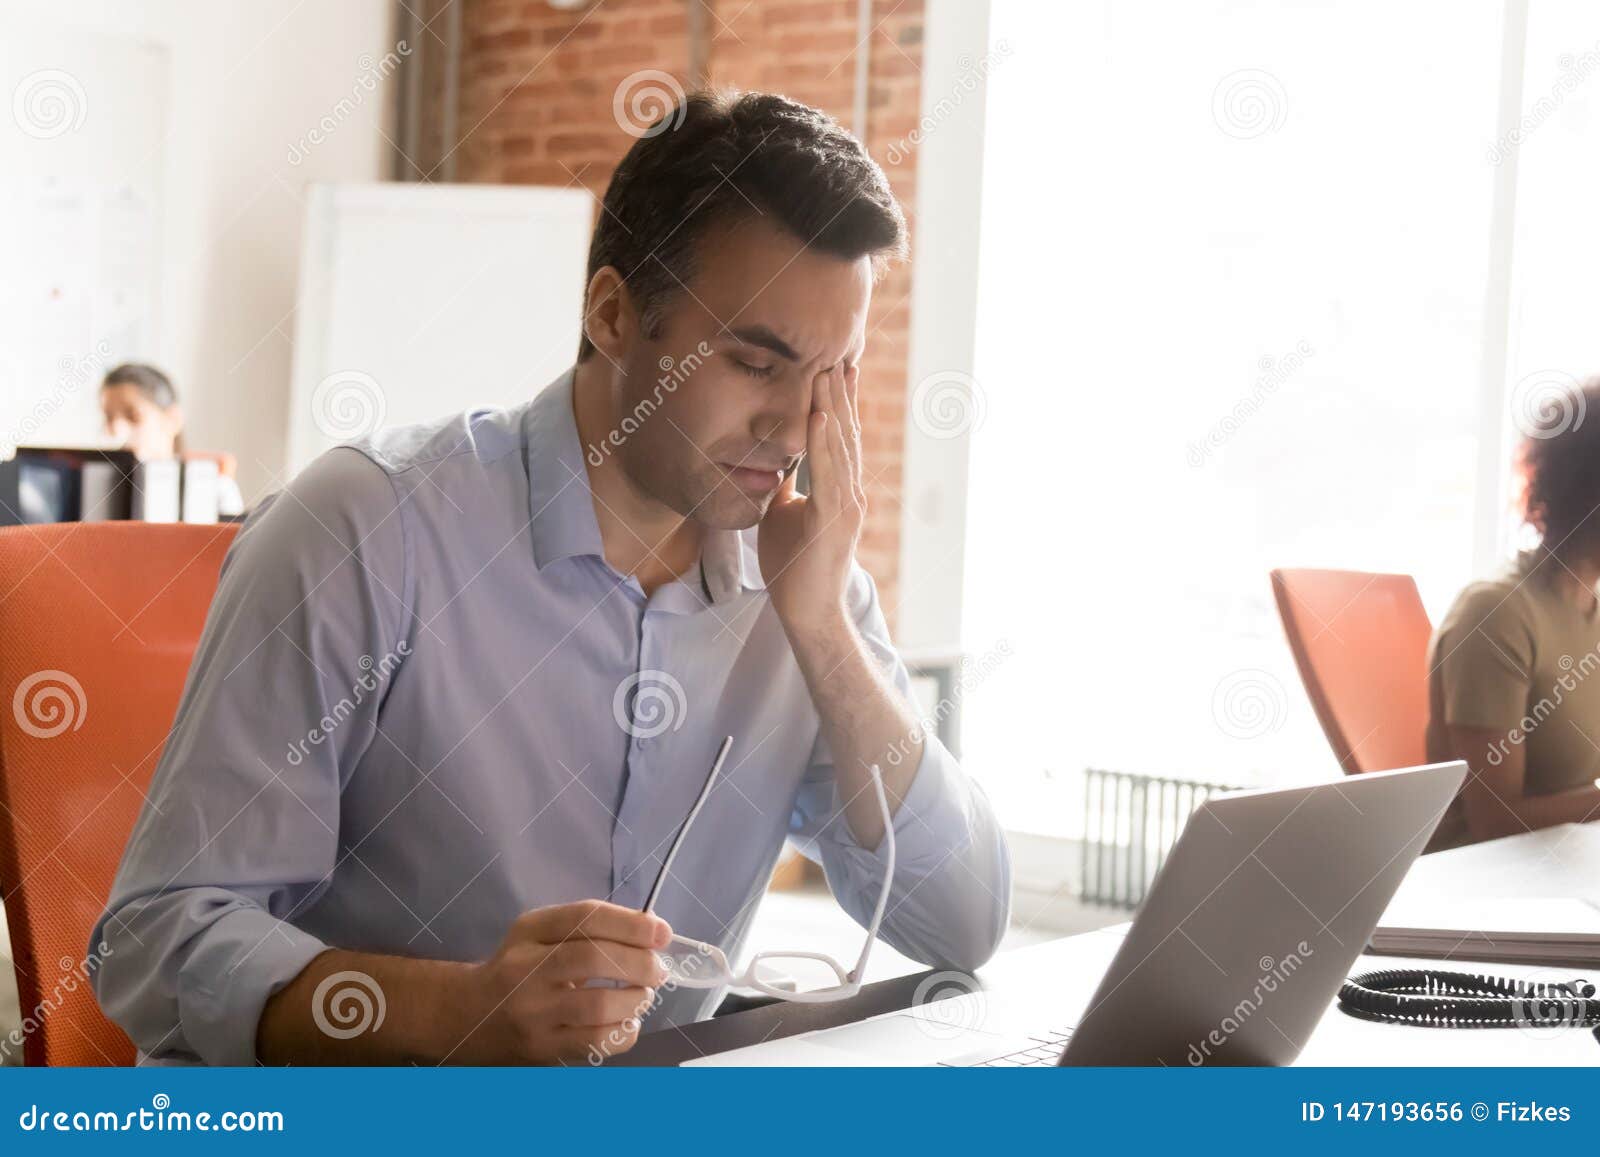 exhausted employee suffer from dizziness working at laptop